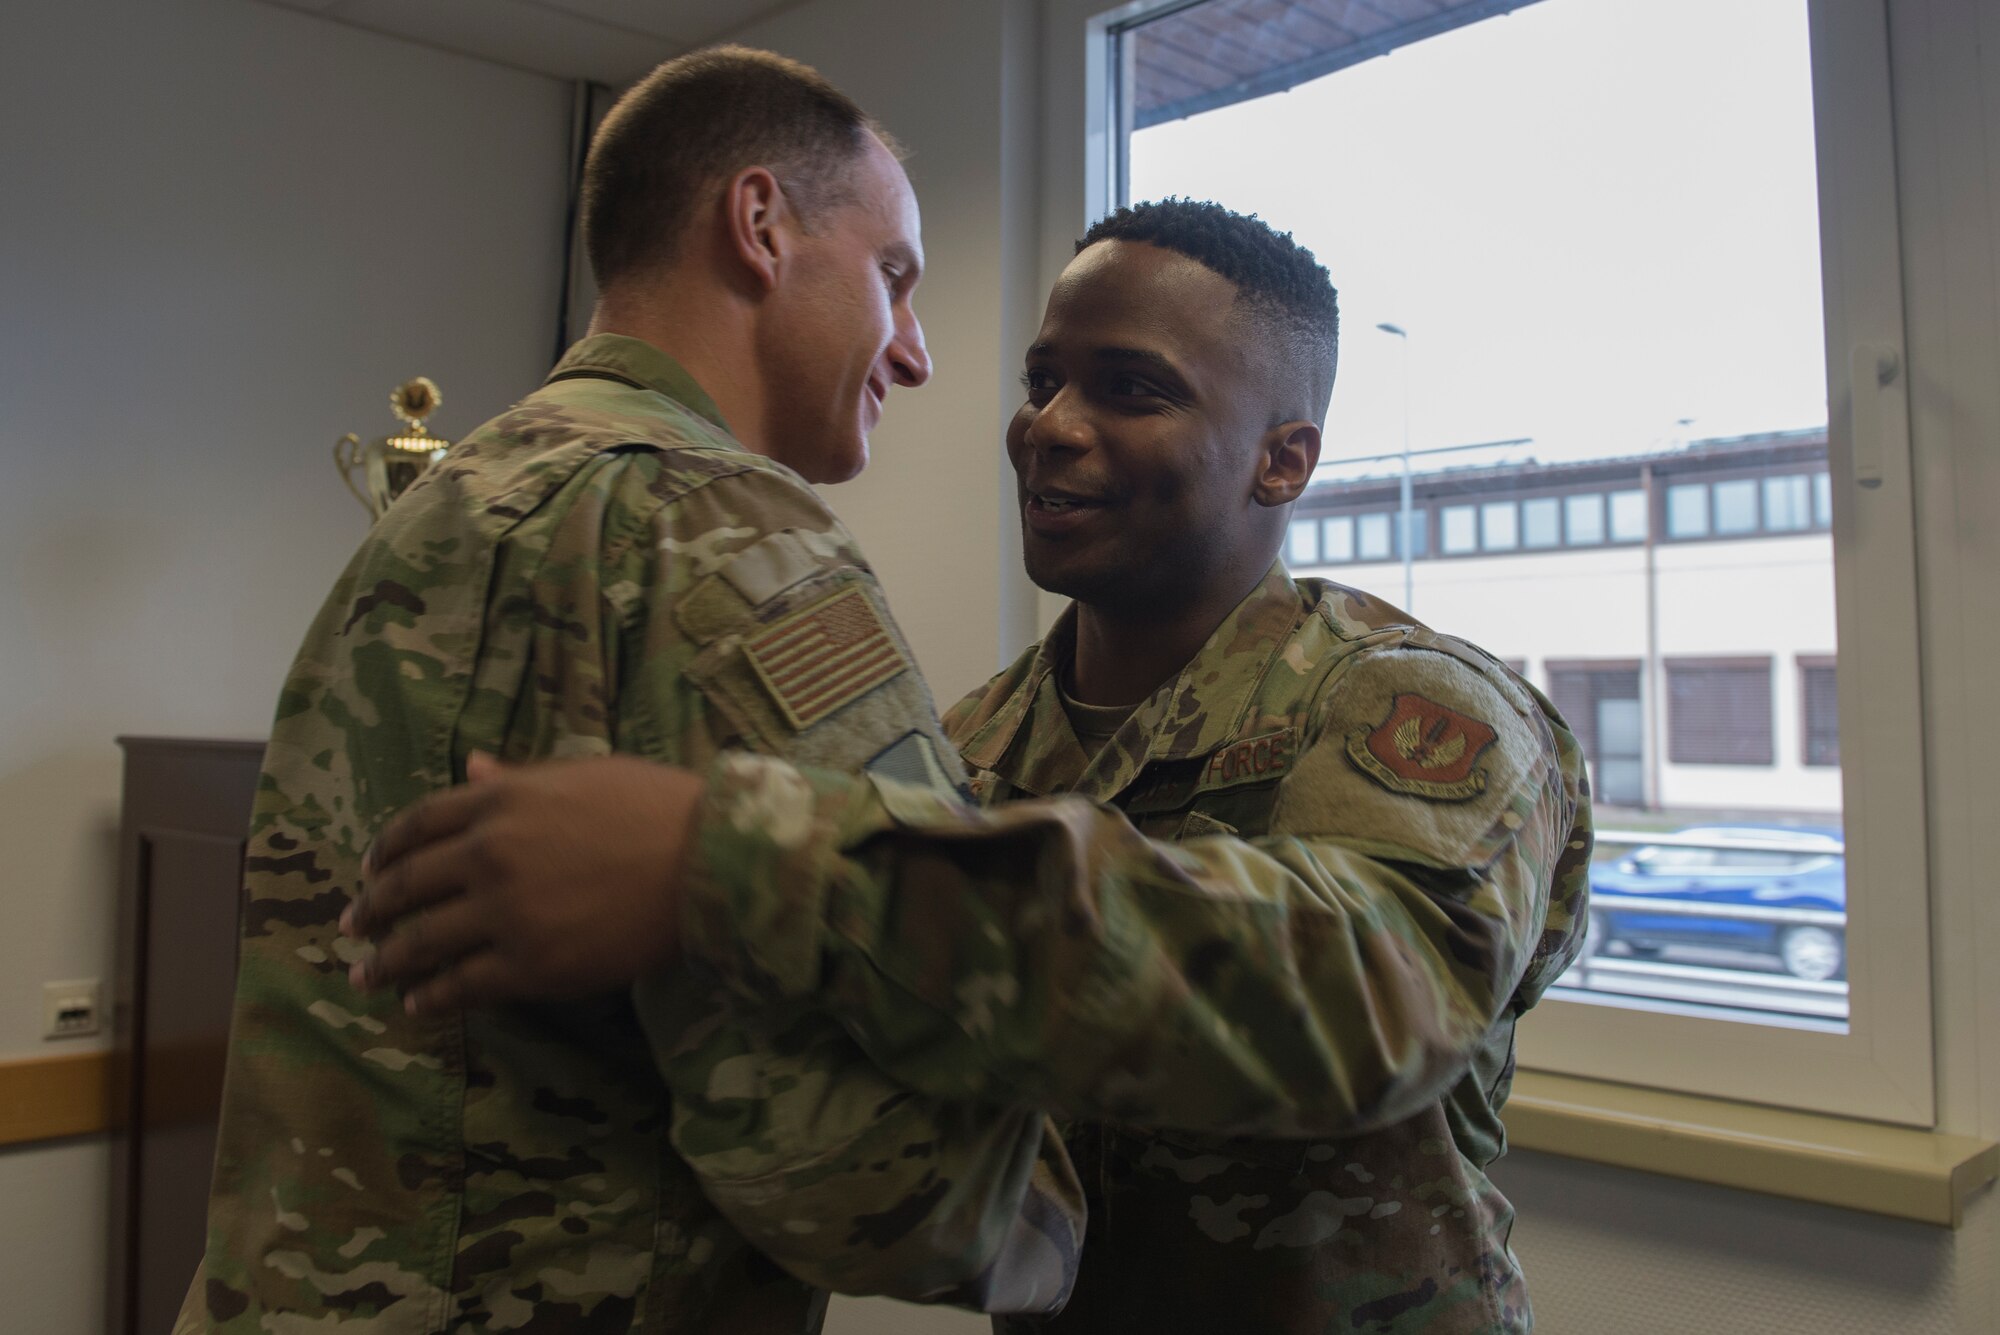 U.S Air Force Col. Matt Husemann, 86th Airlift Wing vice commander, left, congratulates Tech. Sgt. Marcus Bias, 86th AW equal opportunity specialist, on being the Airlifter of the Week at Ramstein Air Base, Germany, Jan. 30, 2020. Bias was recognized for going above and beyond to make the 86th AW the World’s Best Wing.